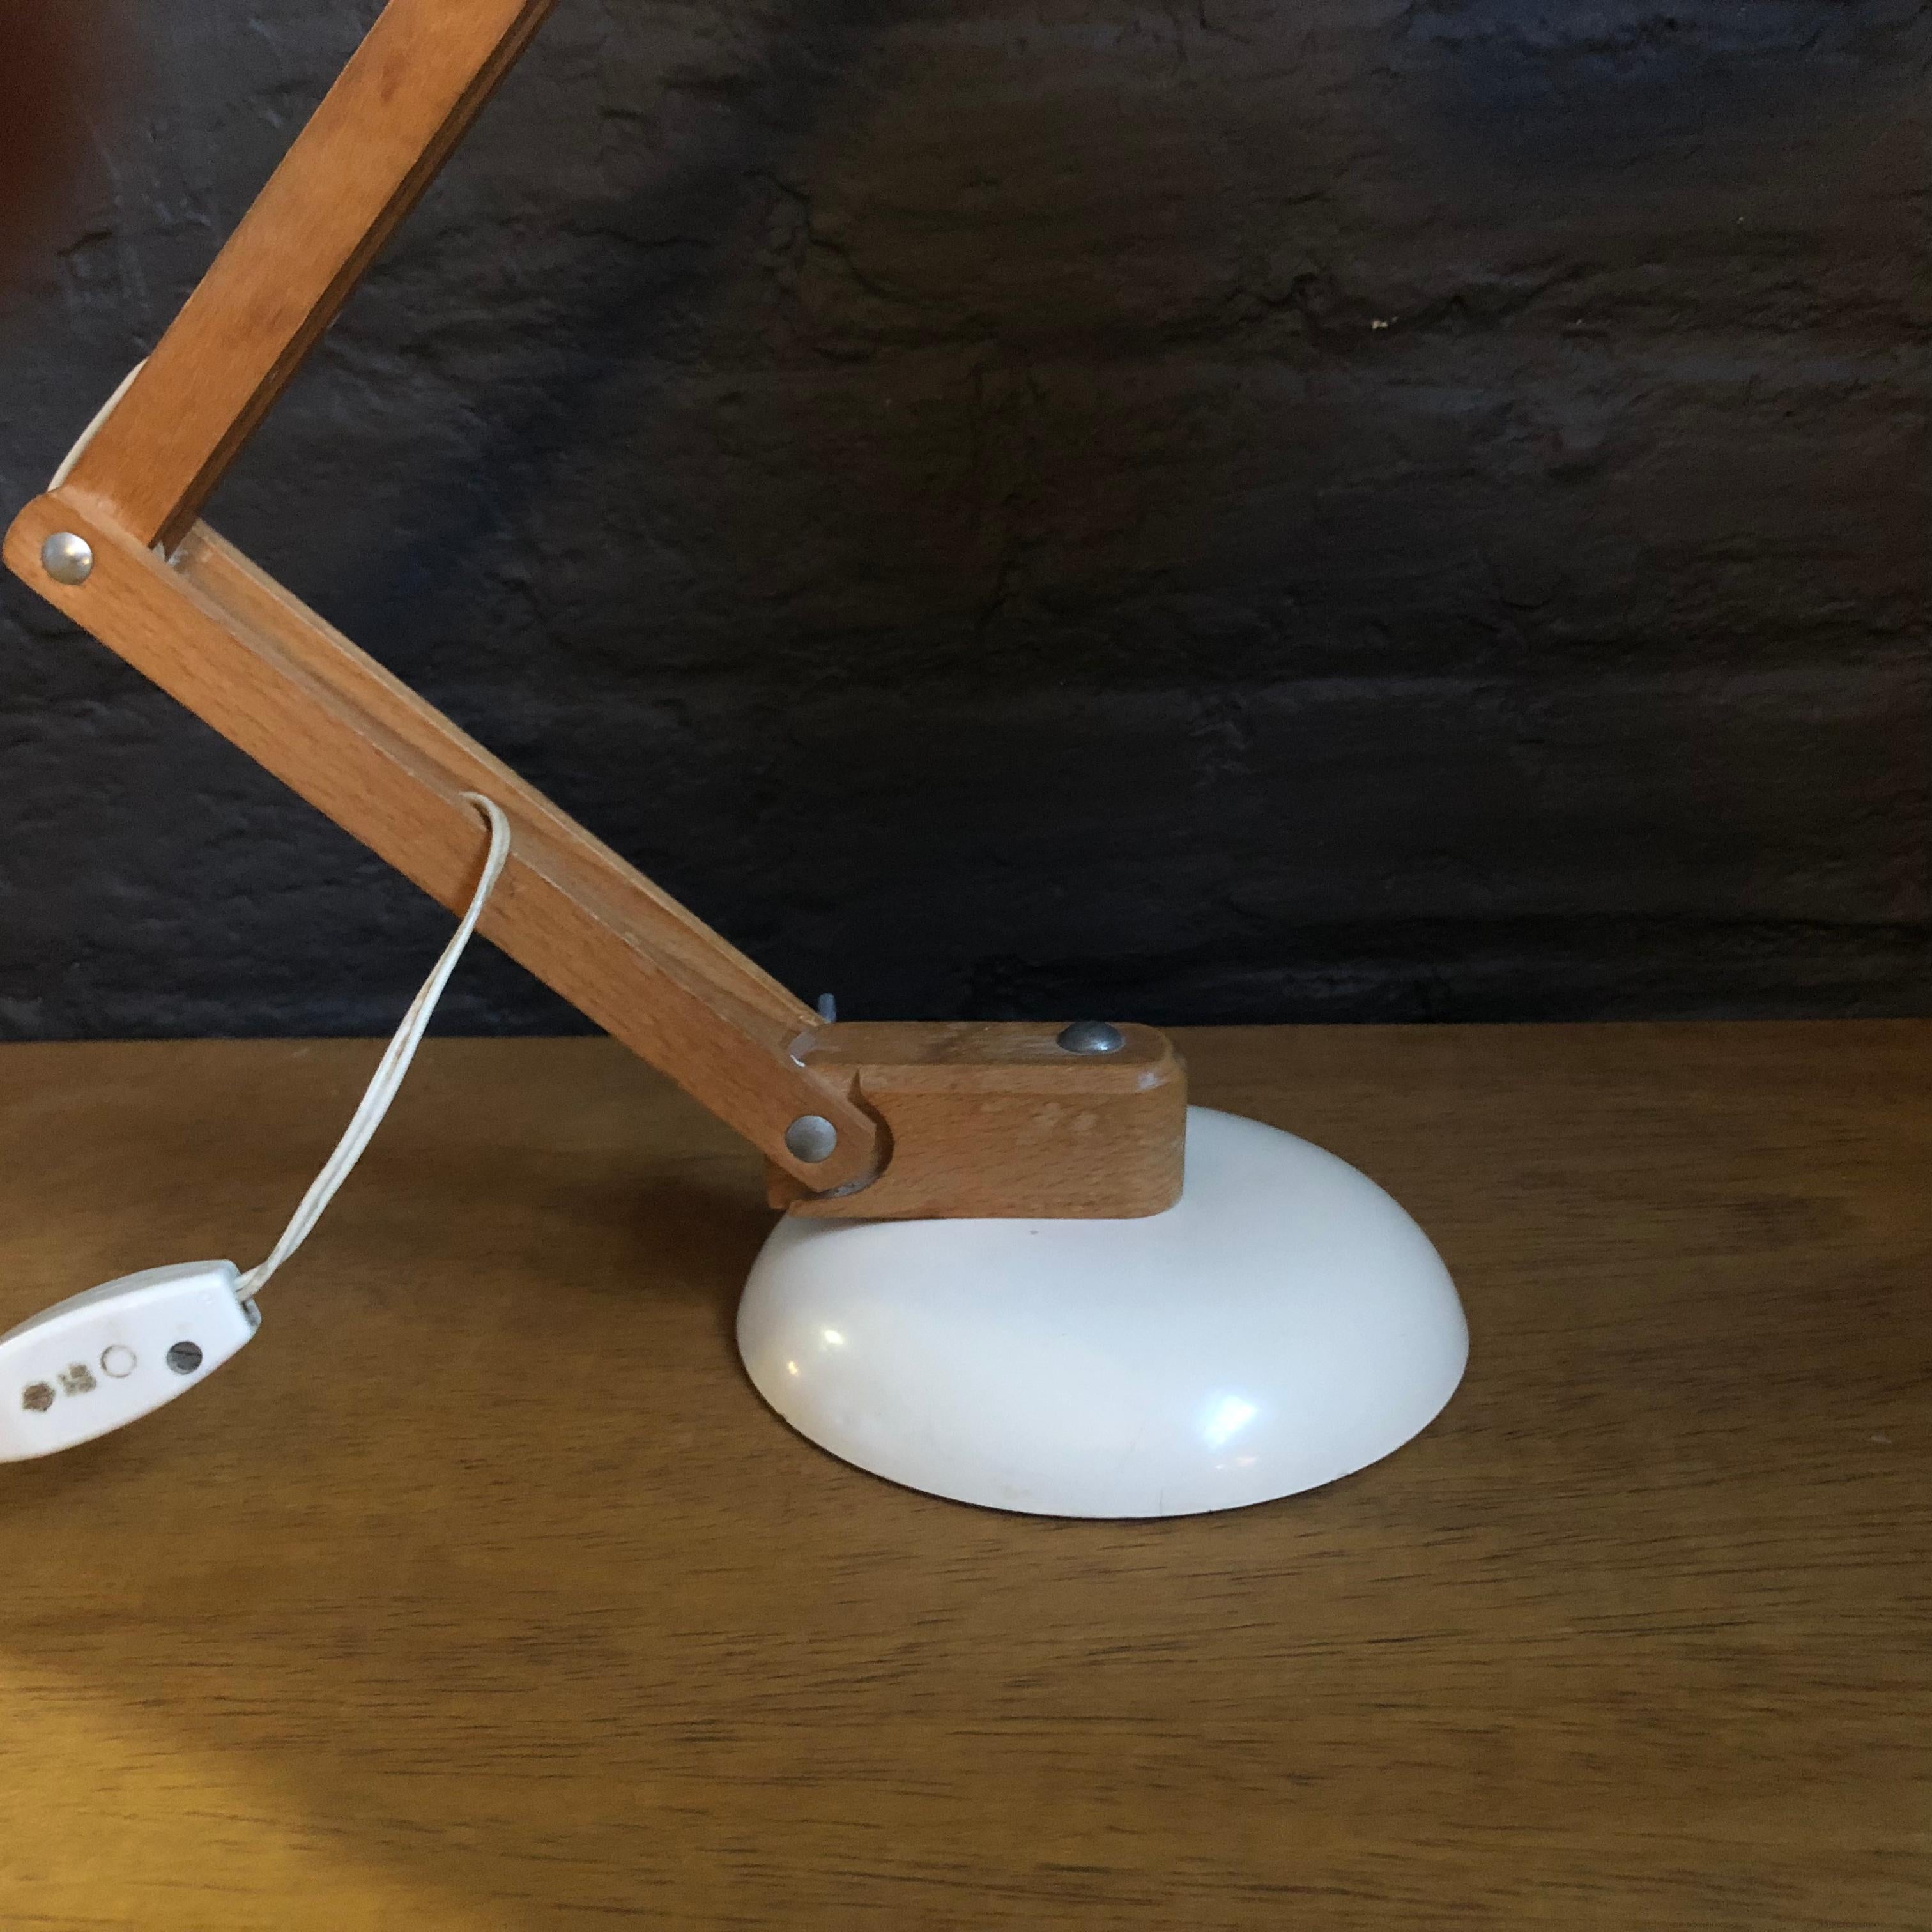 Vintage Maclamp desk/table lamp in white with much sought-after wooden arms.

Designed by Terence Conran for Habitat in the 1950s, this lamp is an icon of the 1950-1960s period.

In good vintage condition. Some scuffs and wear, commensurate with